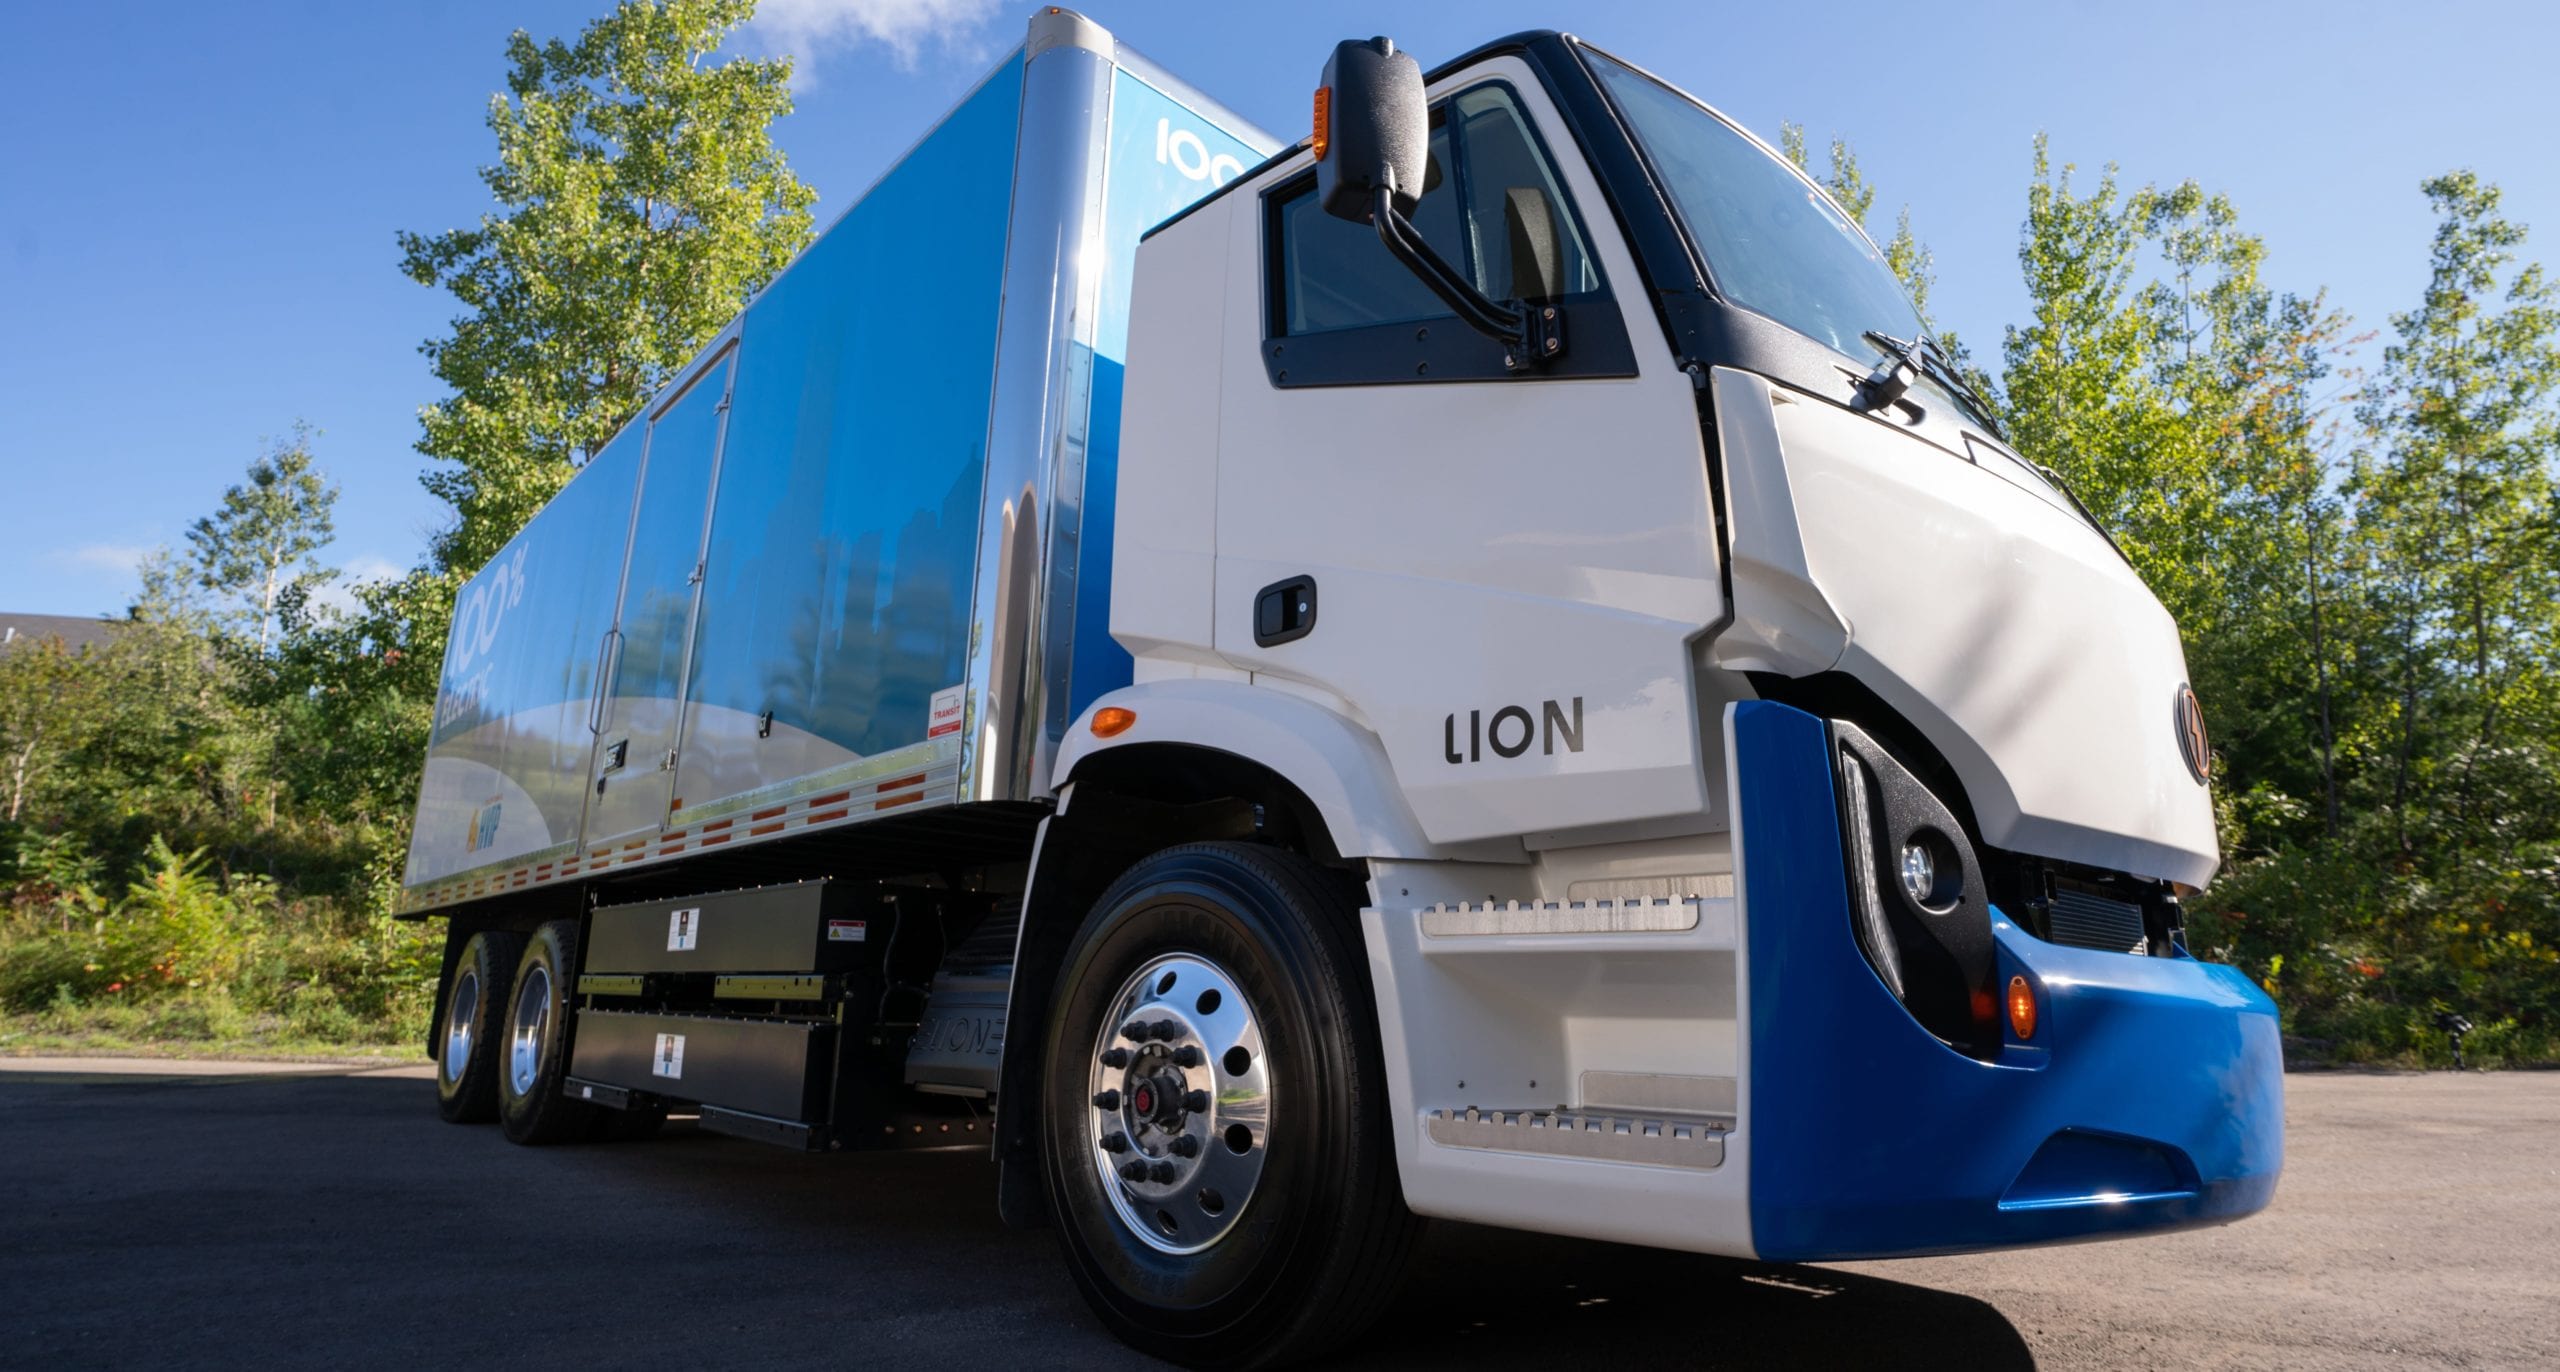 Freight electrification promoted with Lion Electric Freight Truck